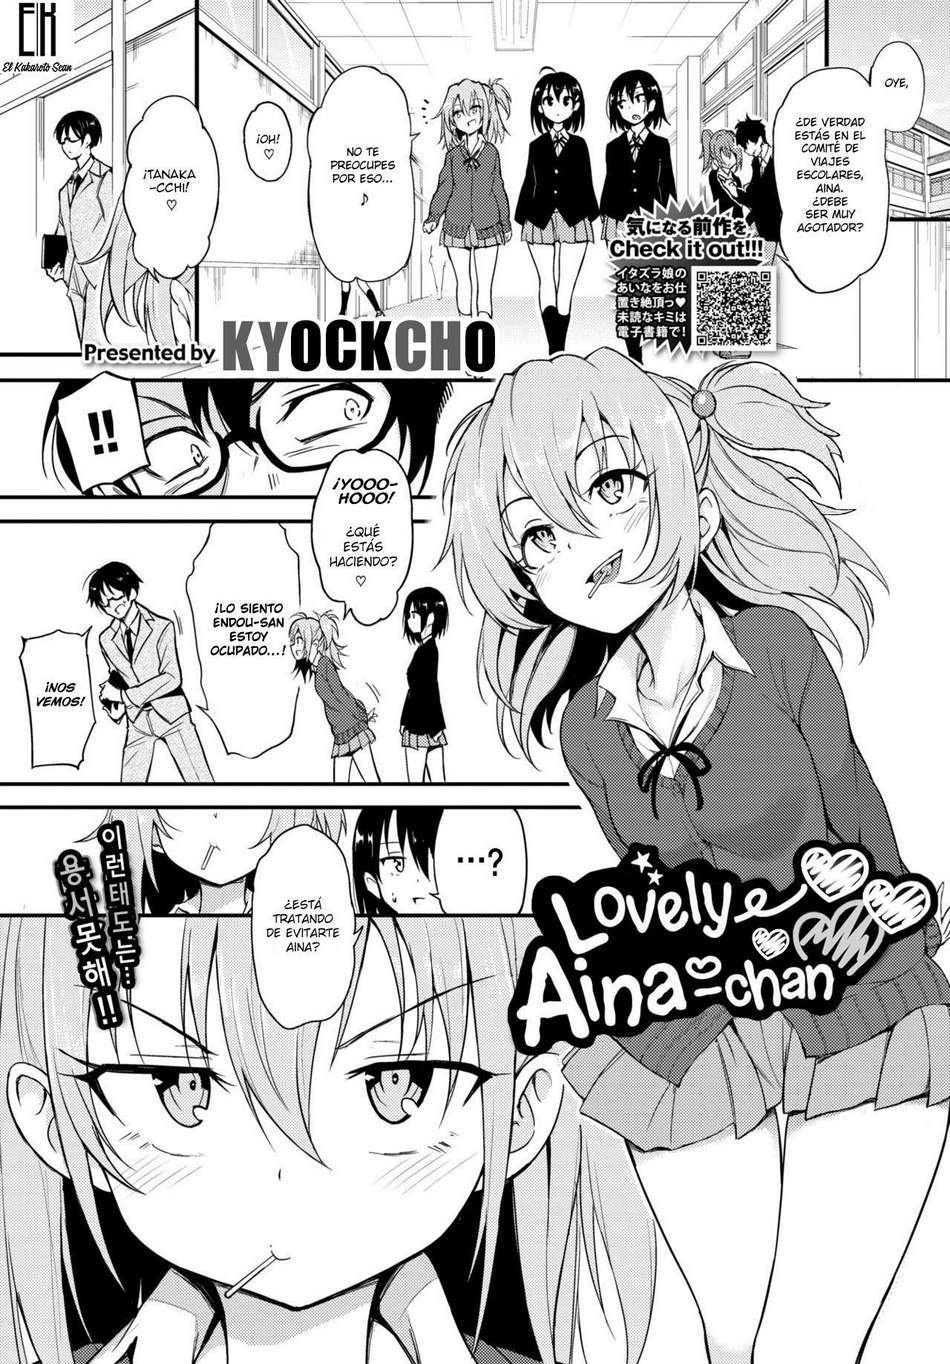 Lovely Aina-chan #2 - Page #1